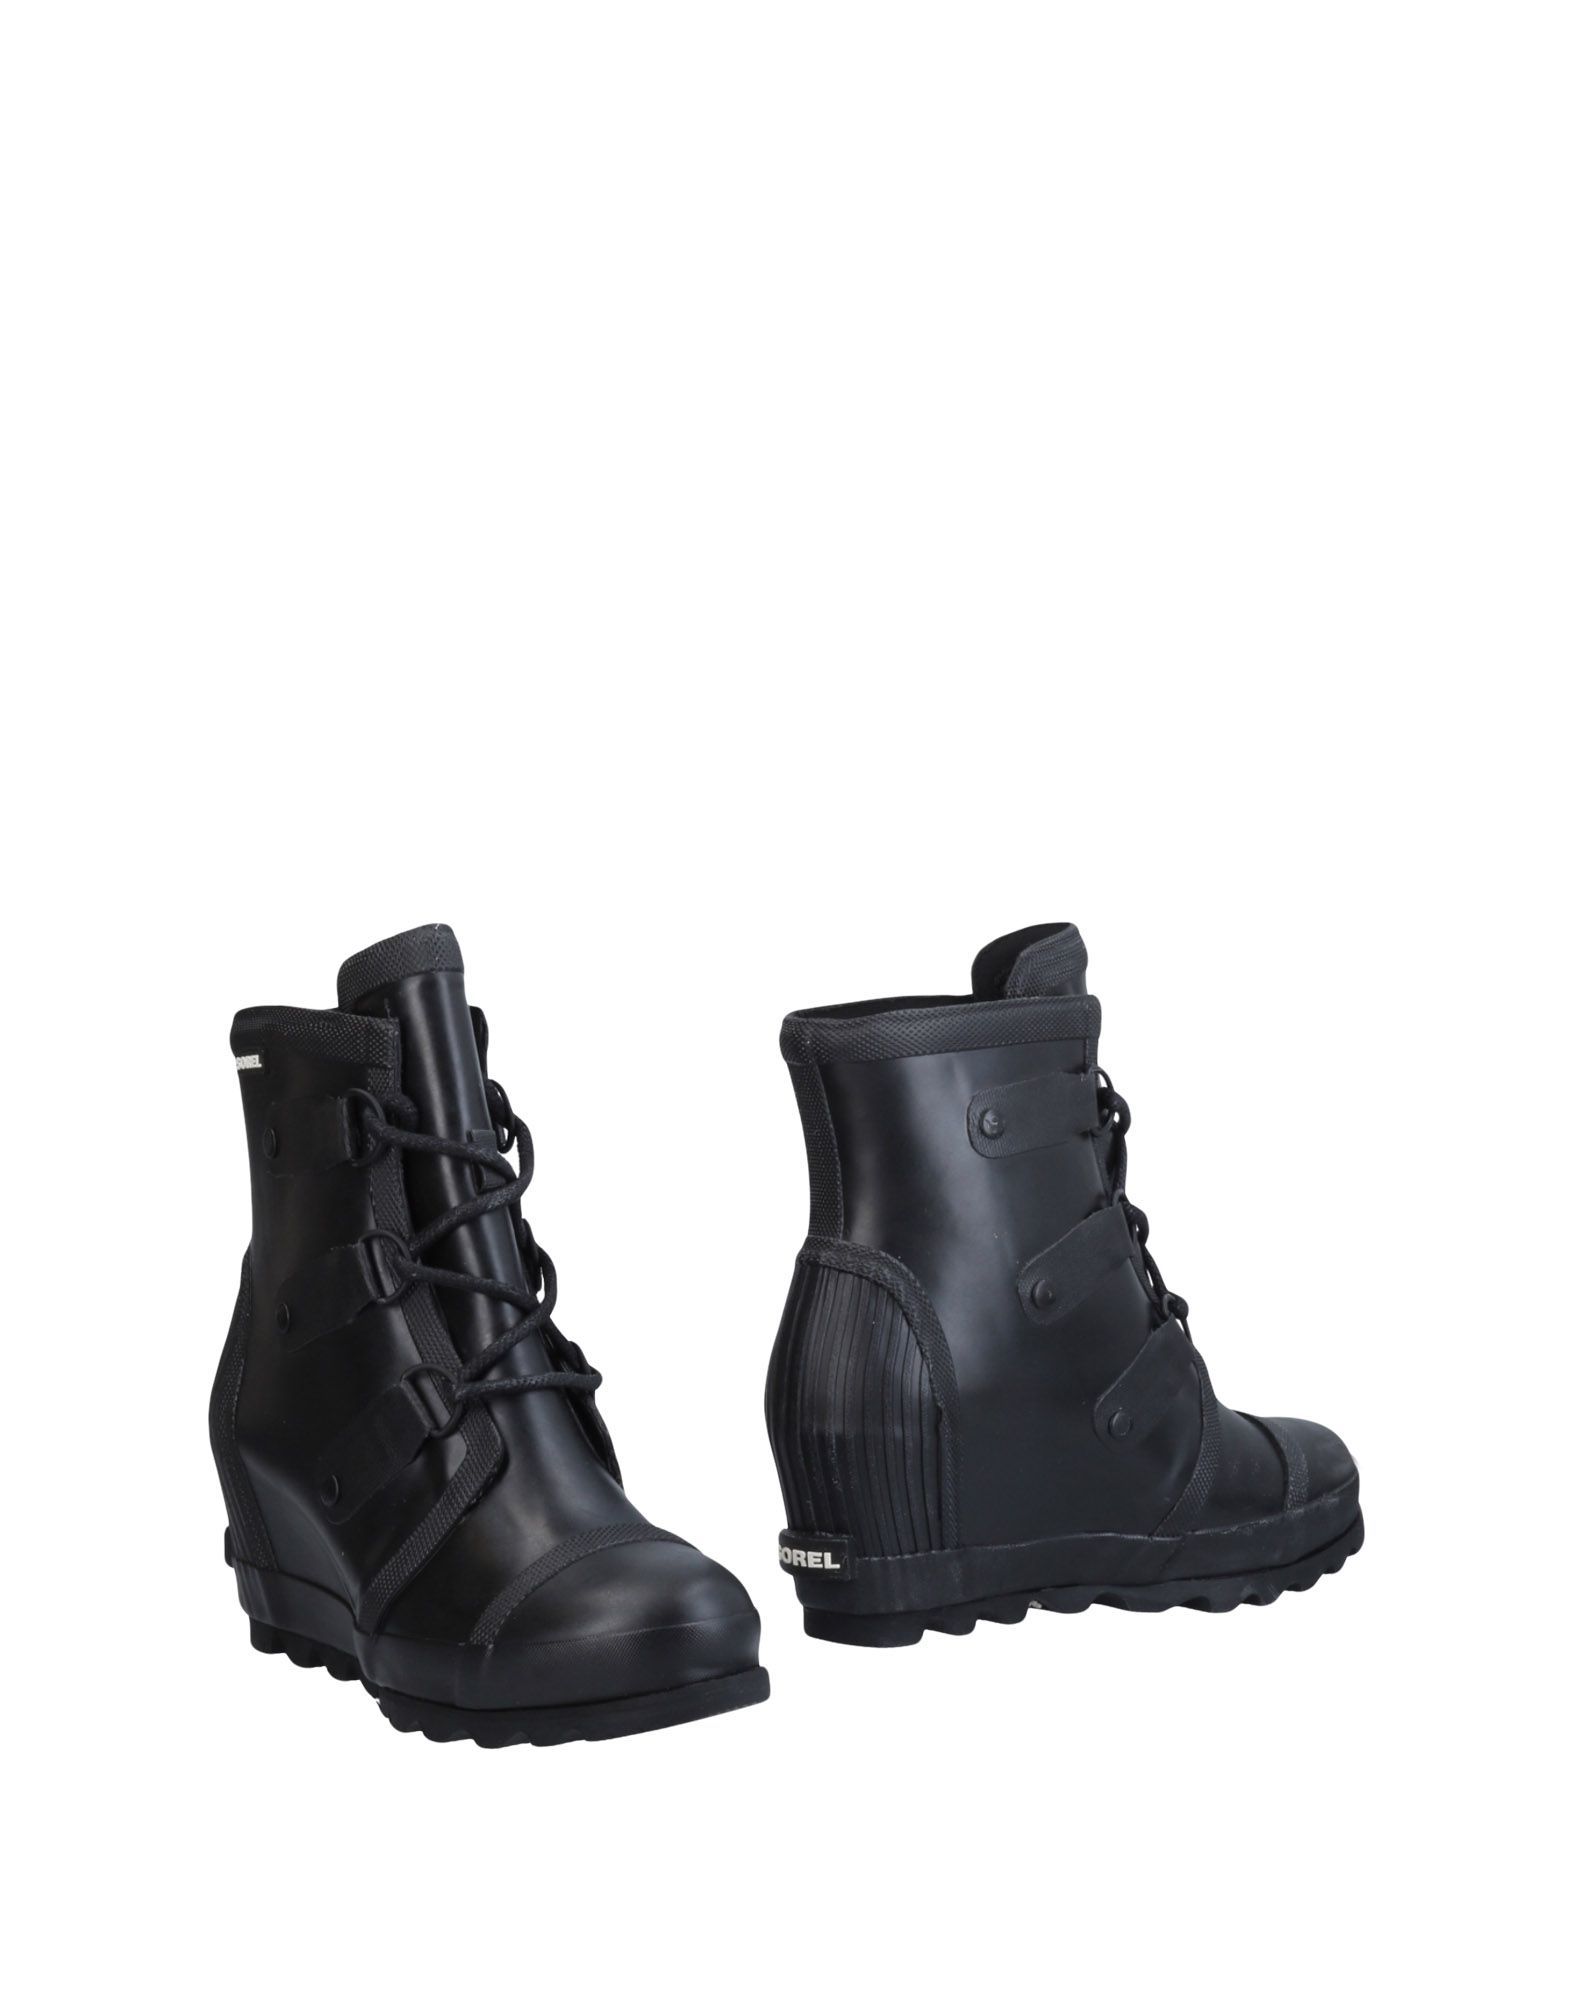 SOREL Ankle boots | YOOX (US)